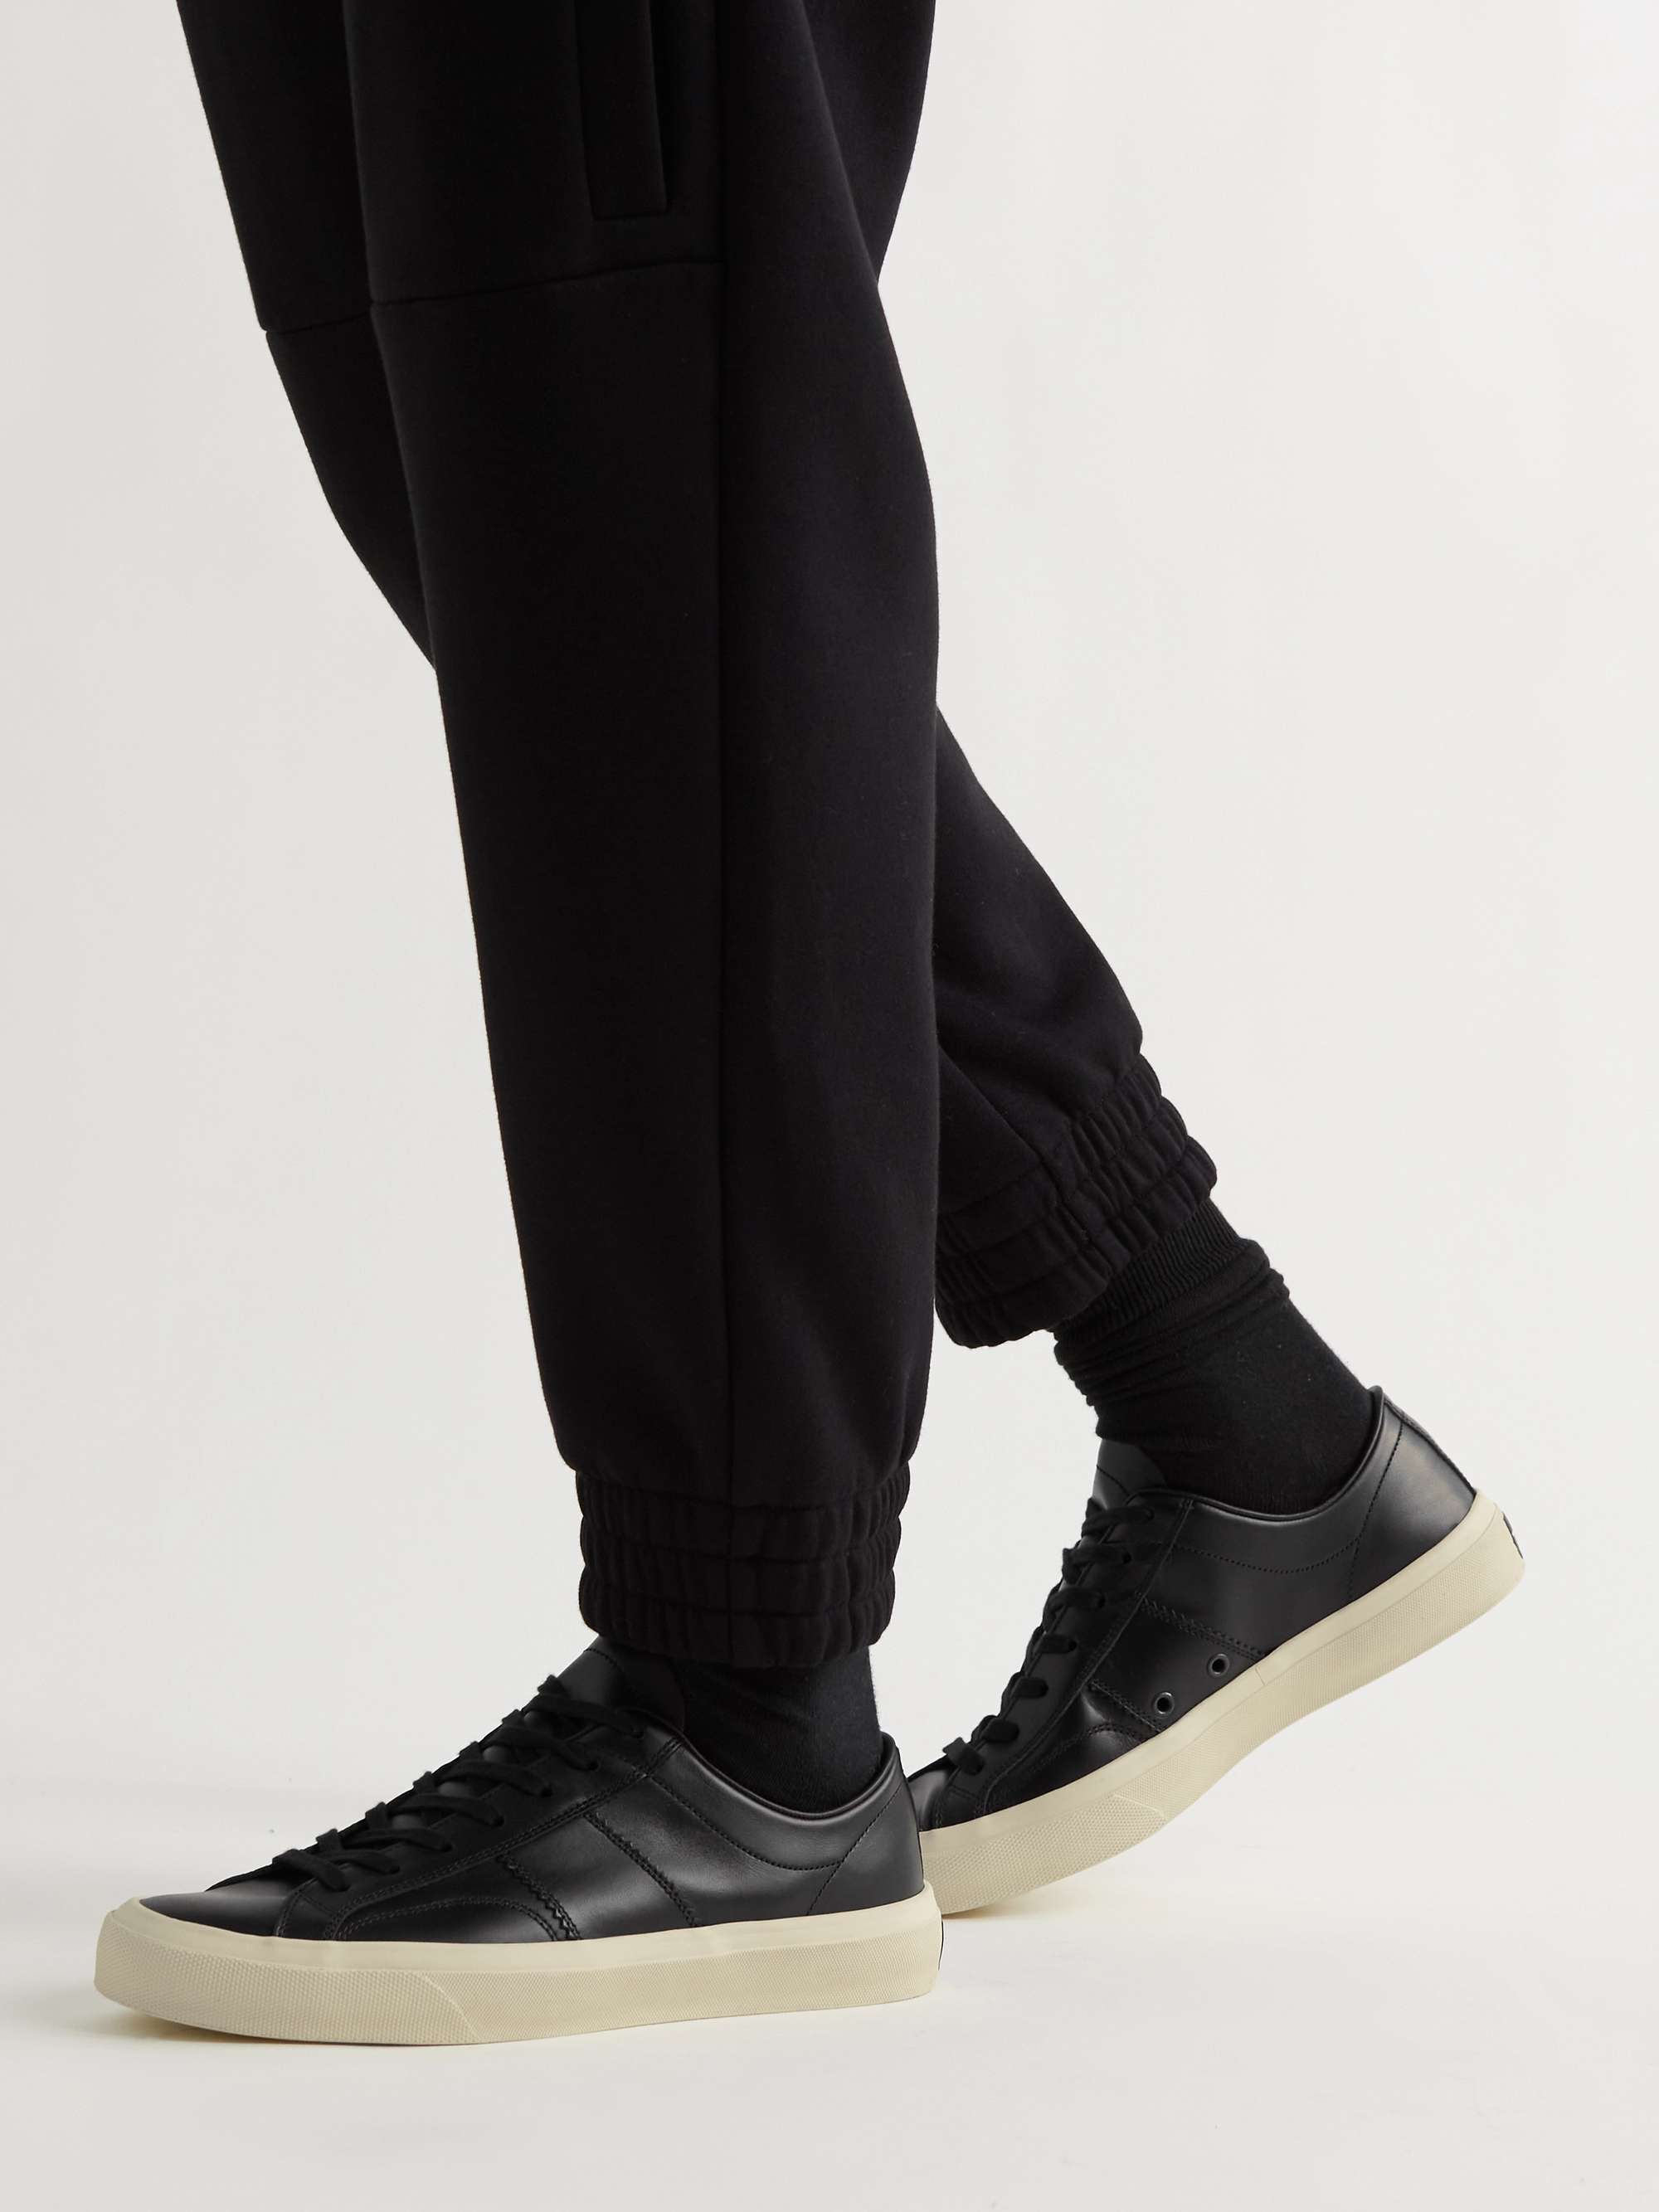 Black Cambridge Leather-Trimmed Suede Sneakers | TOM FORD | MR PORTER